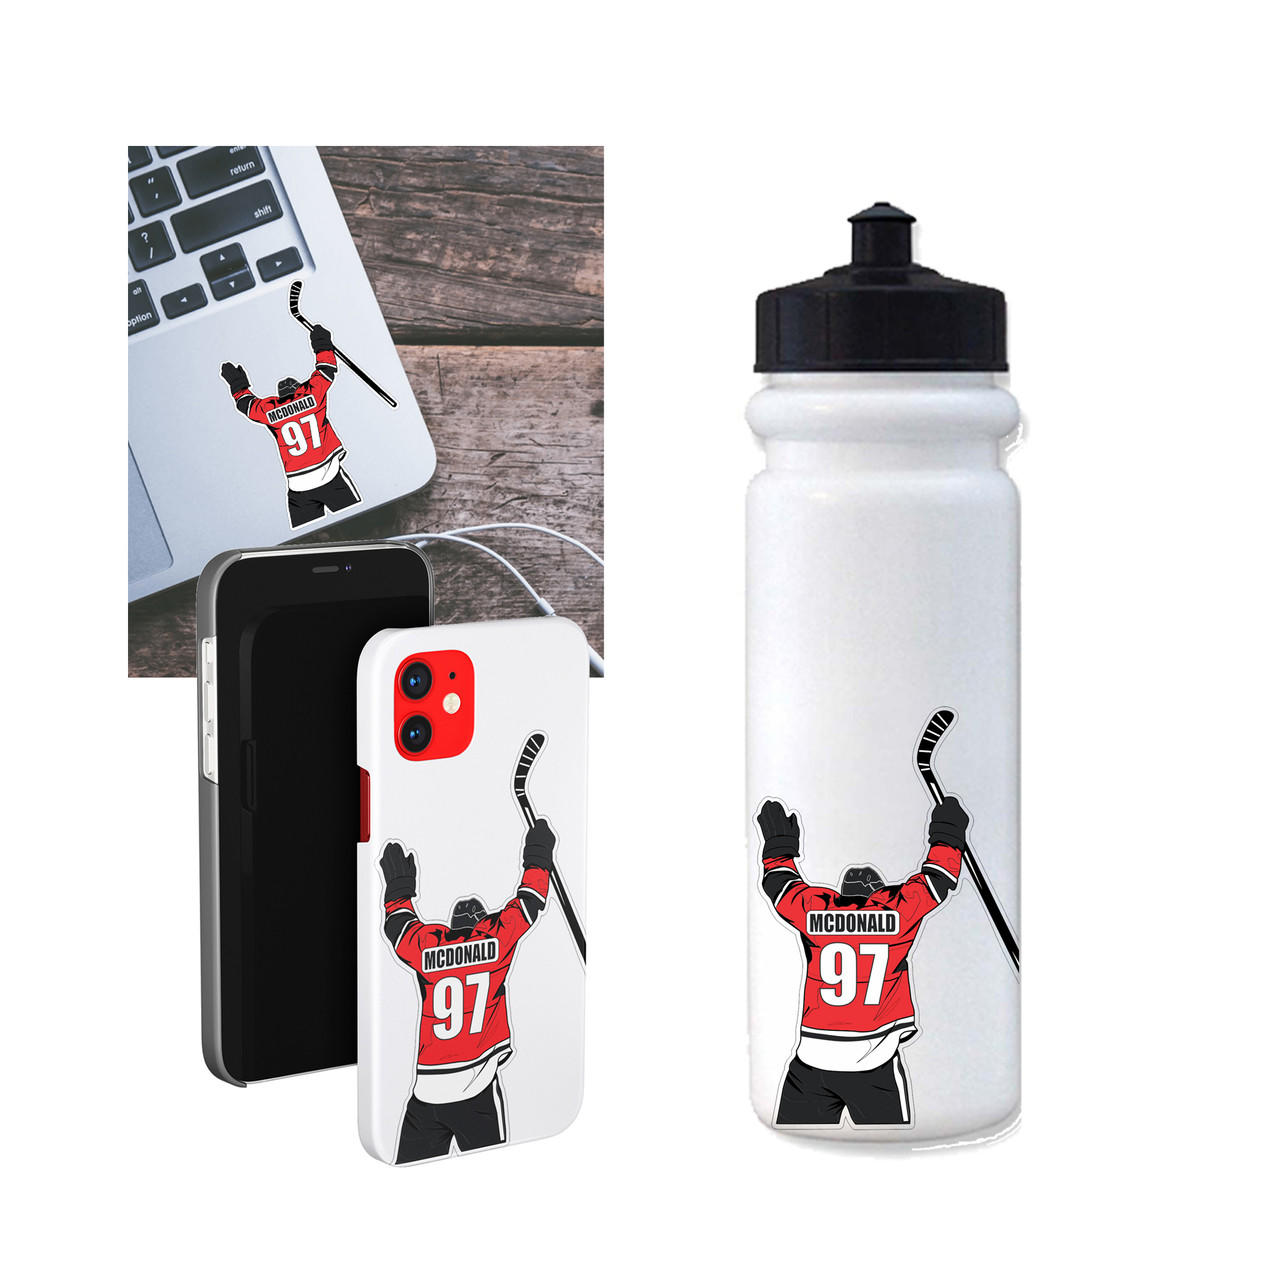 Personalized Hockey Water Bottle Stickers -6 Pack Questions & Answers